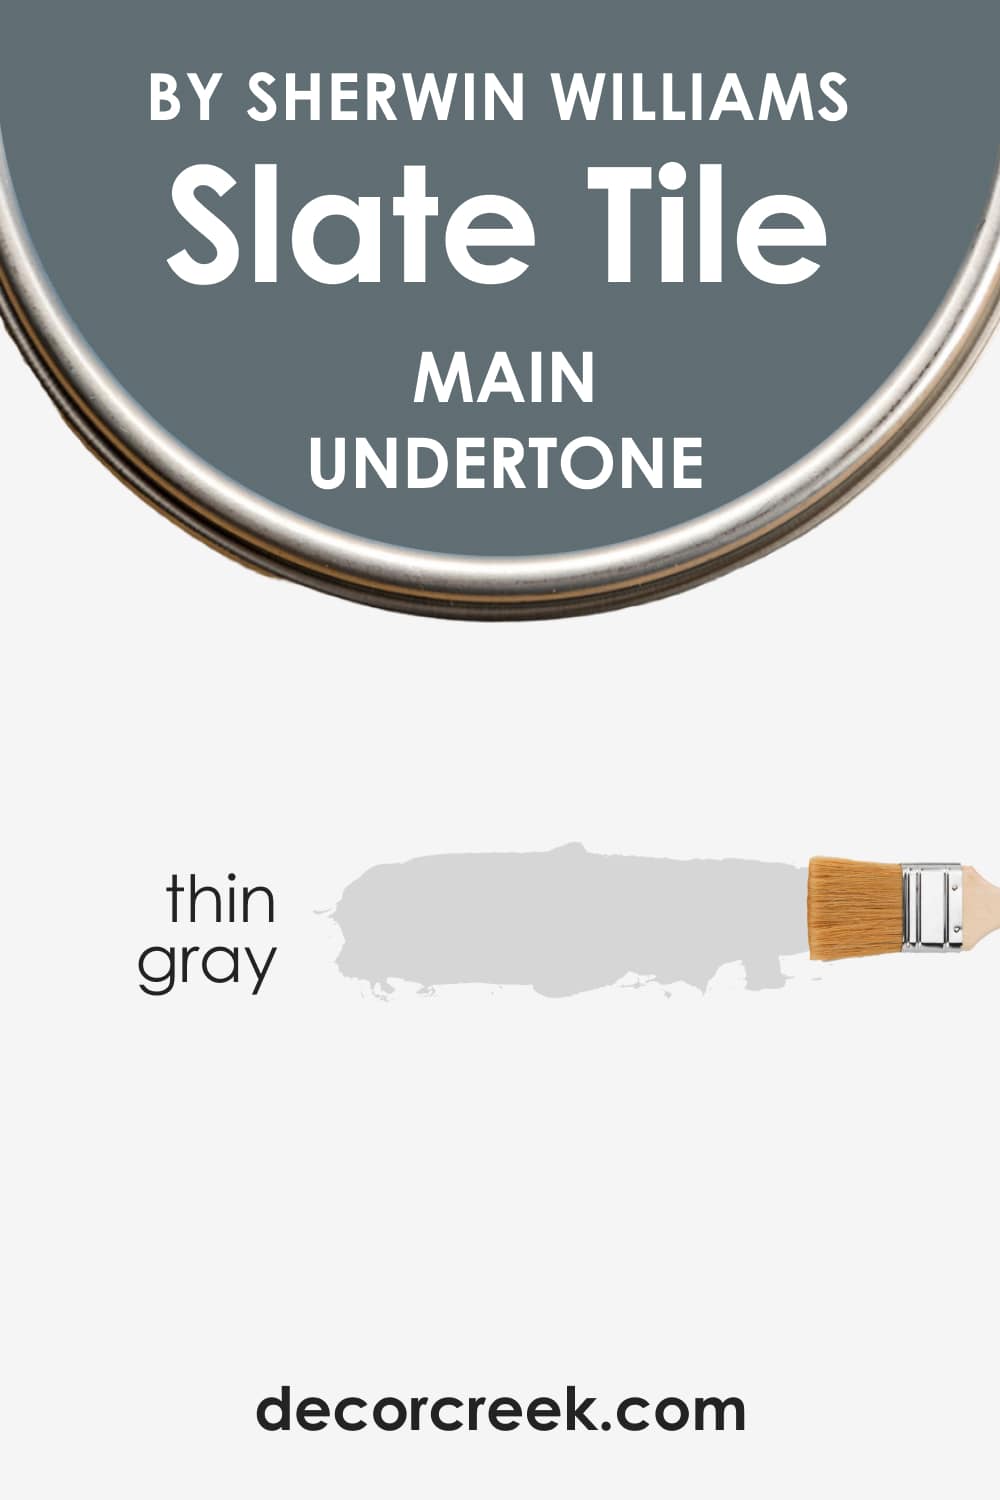 What Undertones Does Sherwin-Williams Slate Tile Color Have?